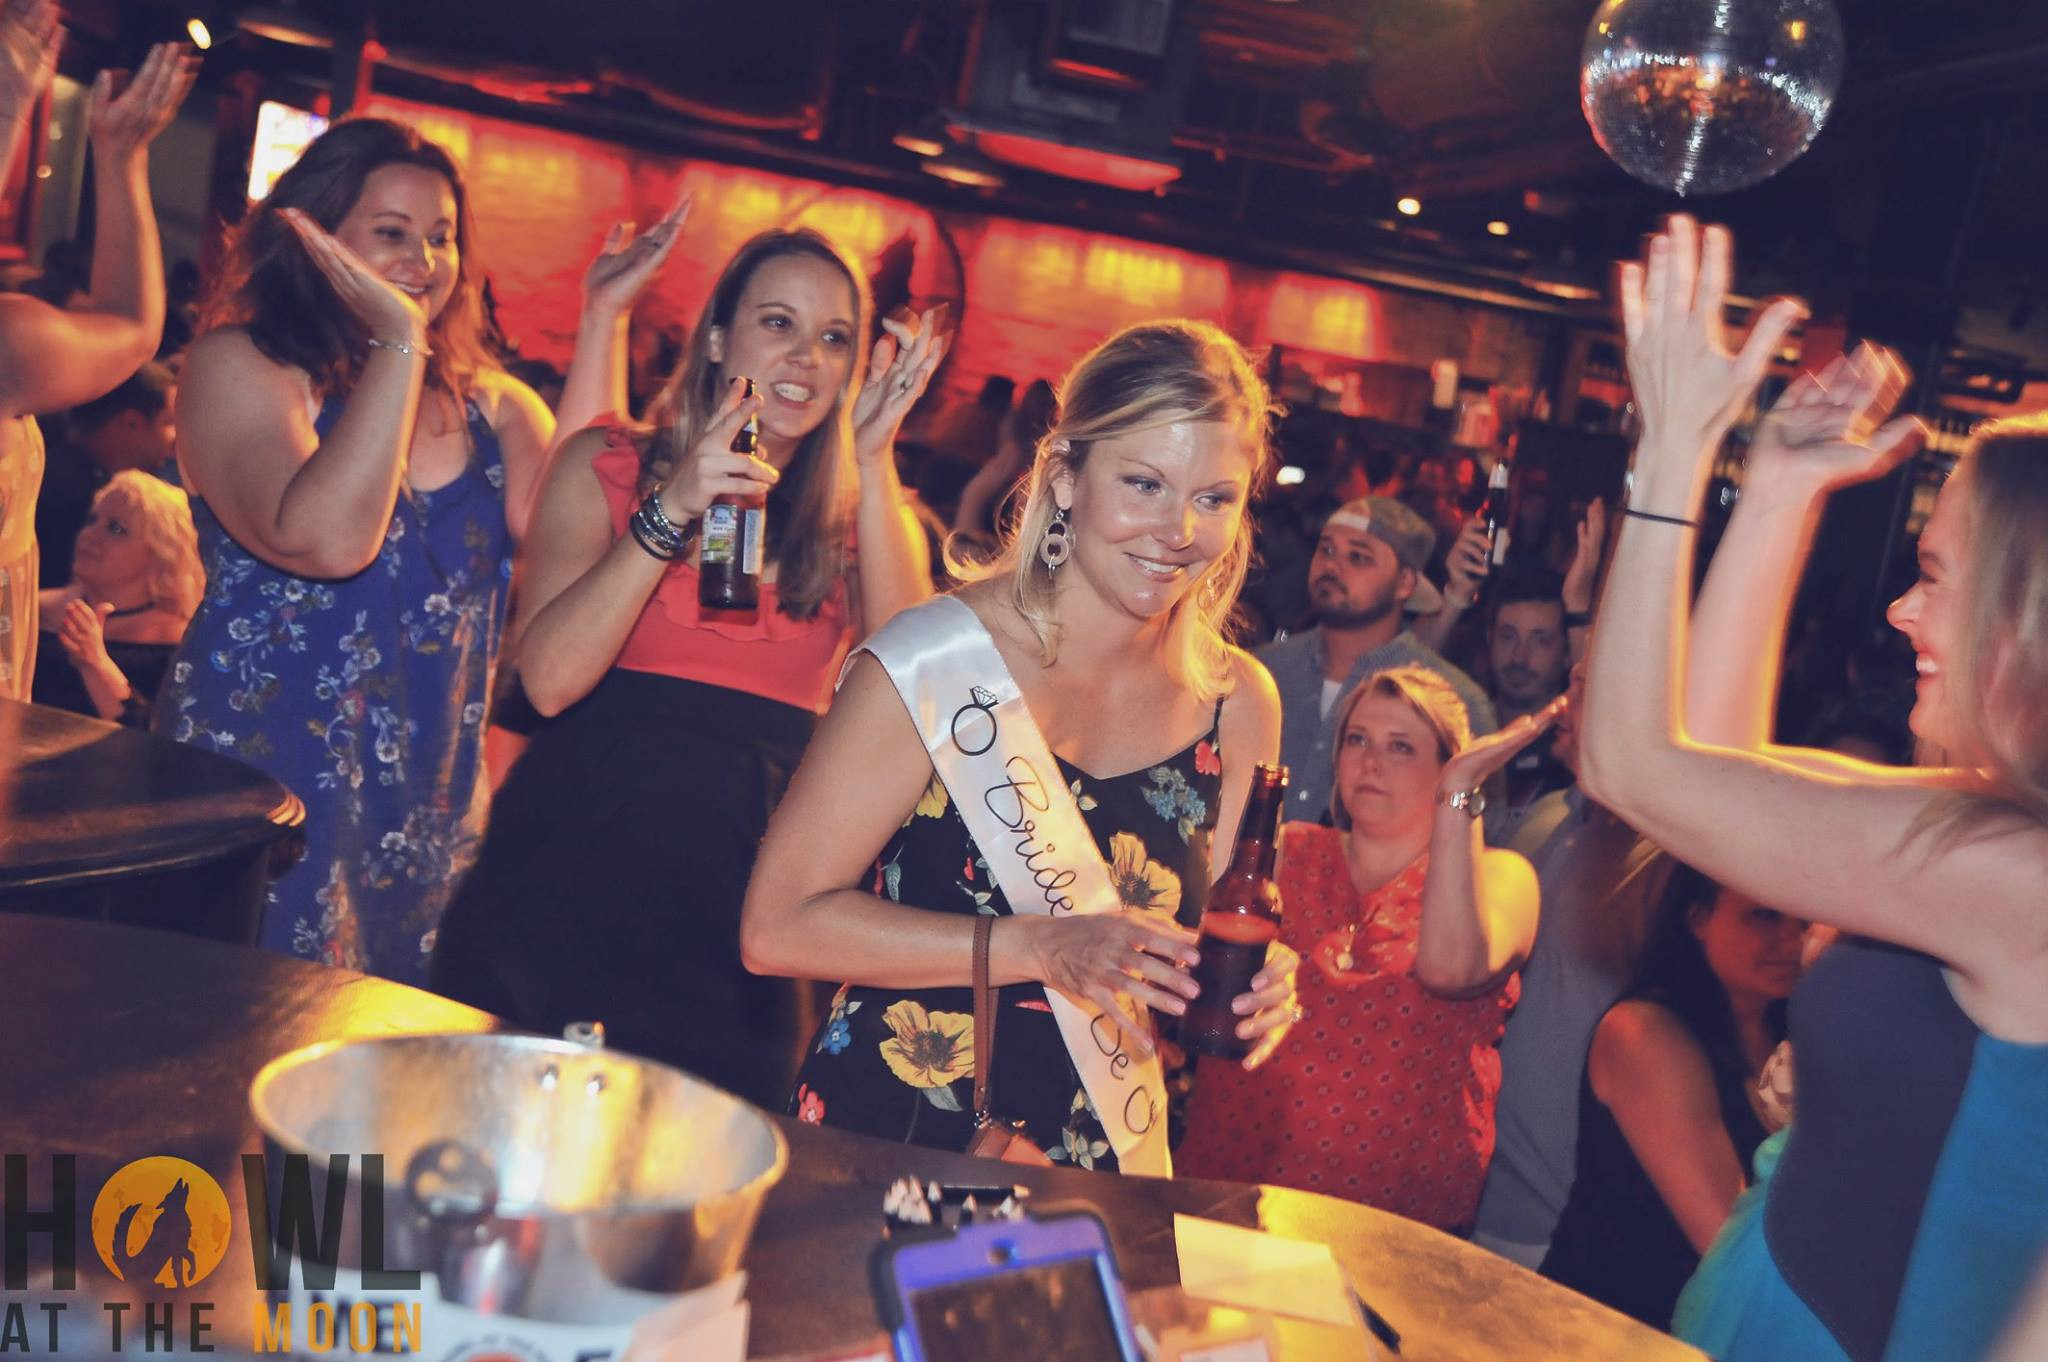 Bachelorette Party Location Ideas
 Beginners Guide to Planning a Bachelorette Party